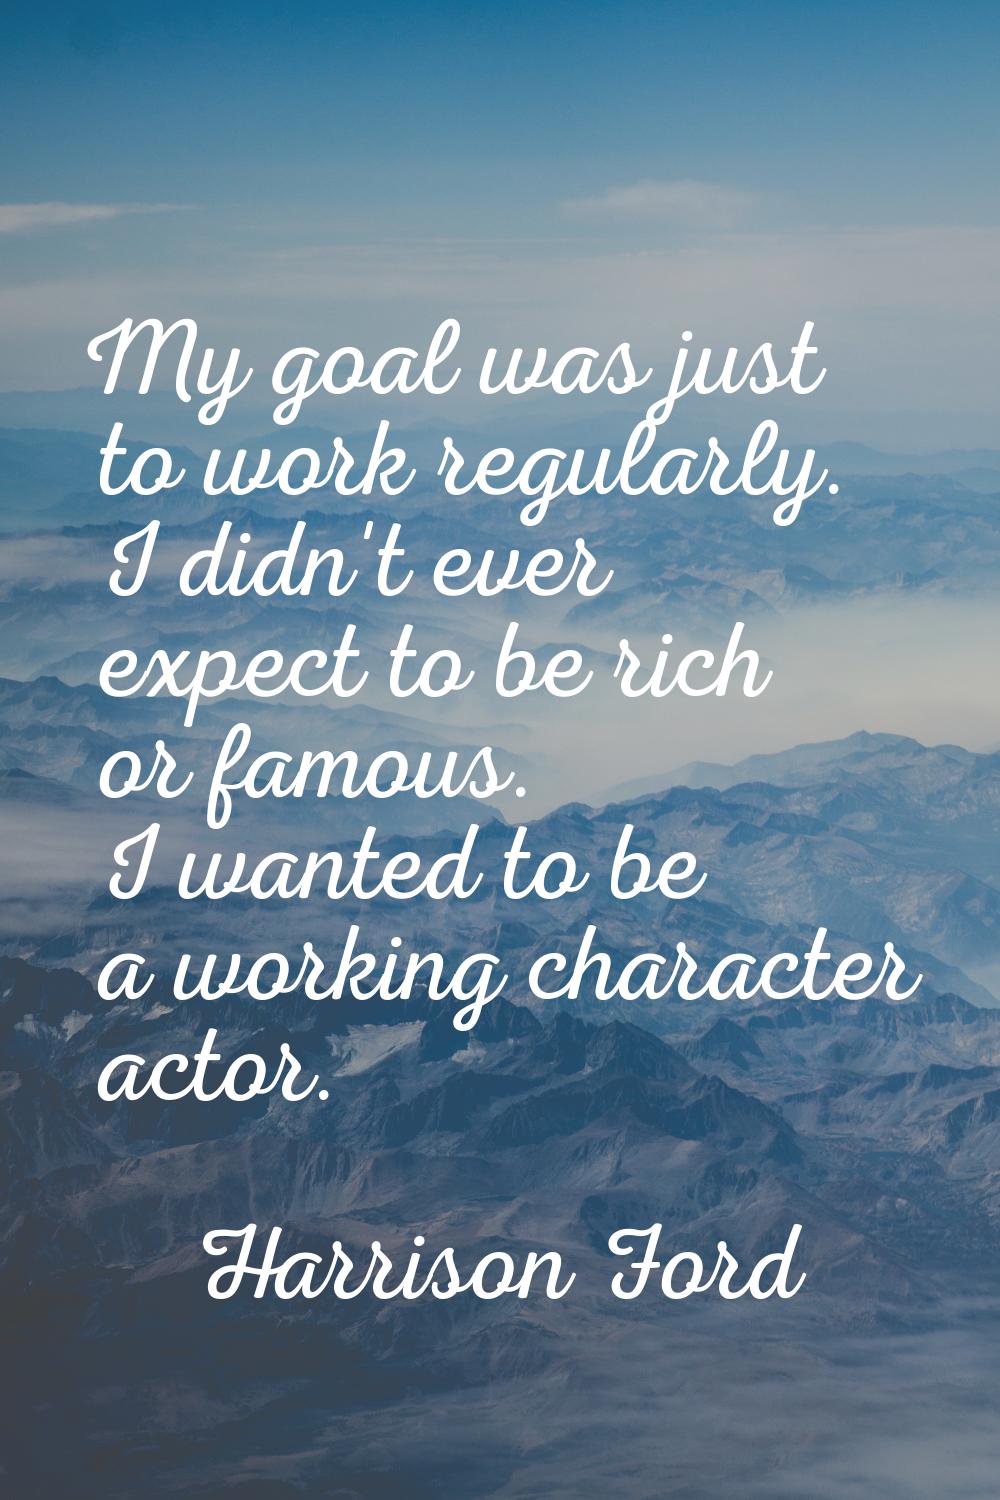 My goal was just to work regularly. I didn't ever expect to be rich or famous. I wanted to be a wor